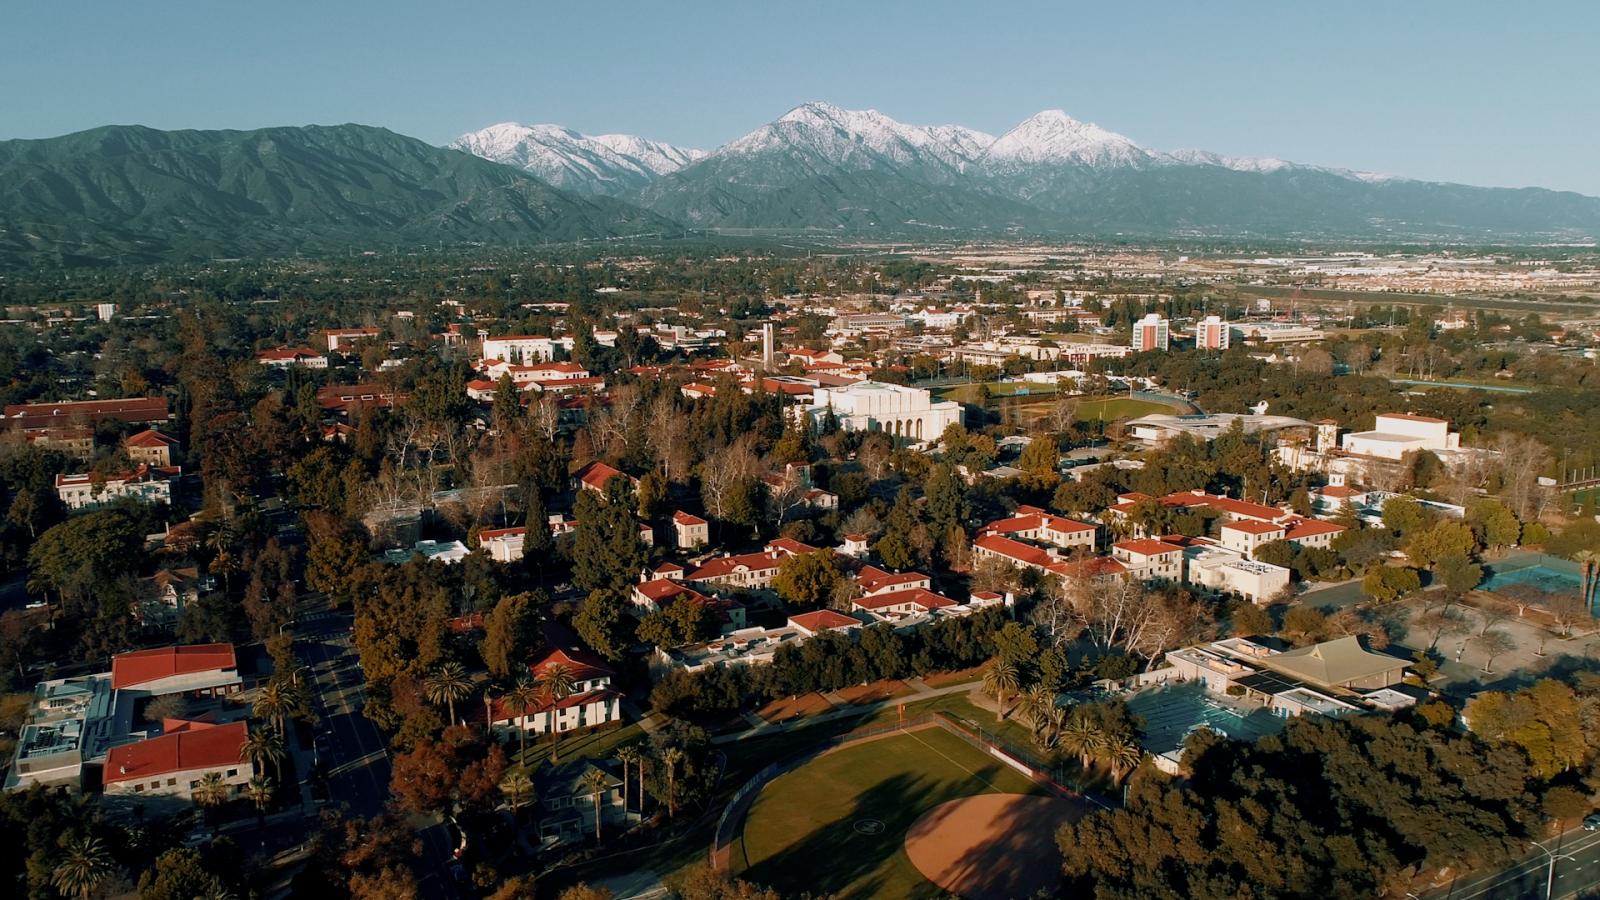 Drone shot of Pomona College with the mountains in the background